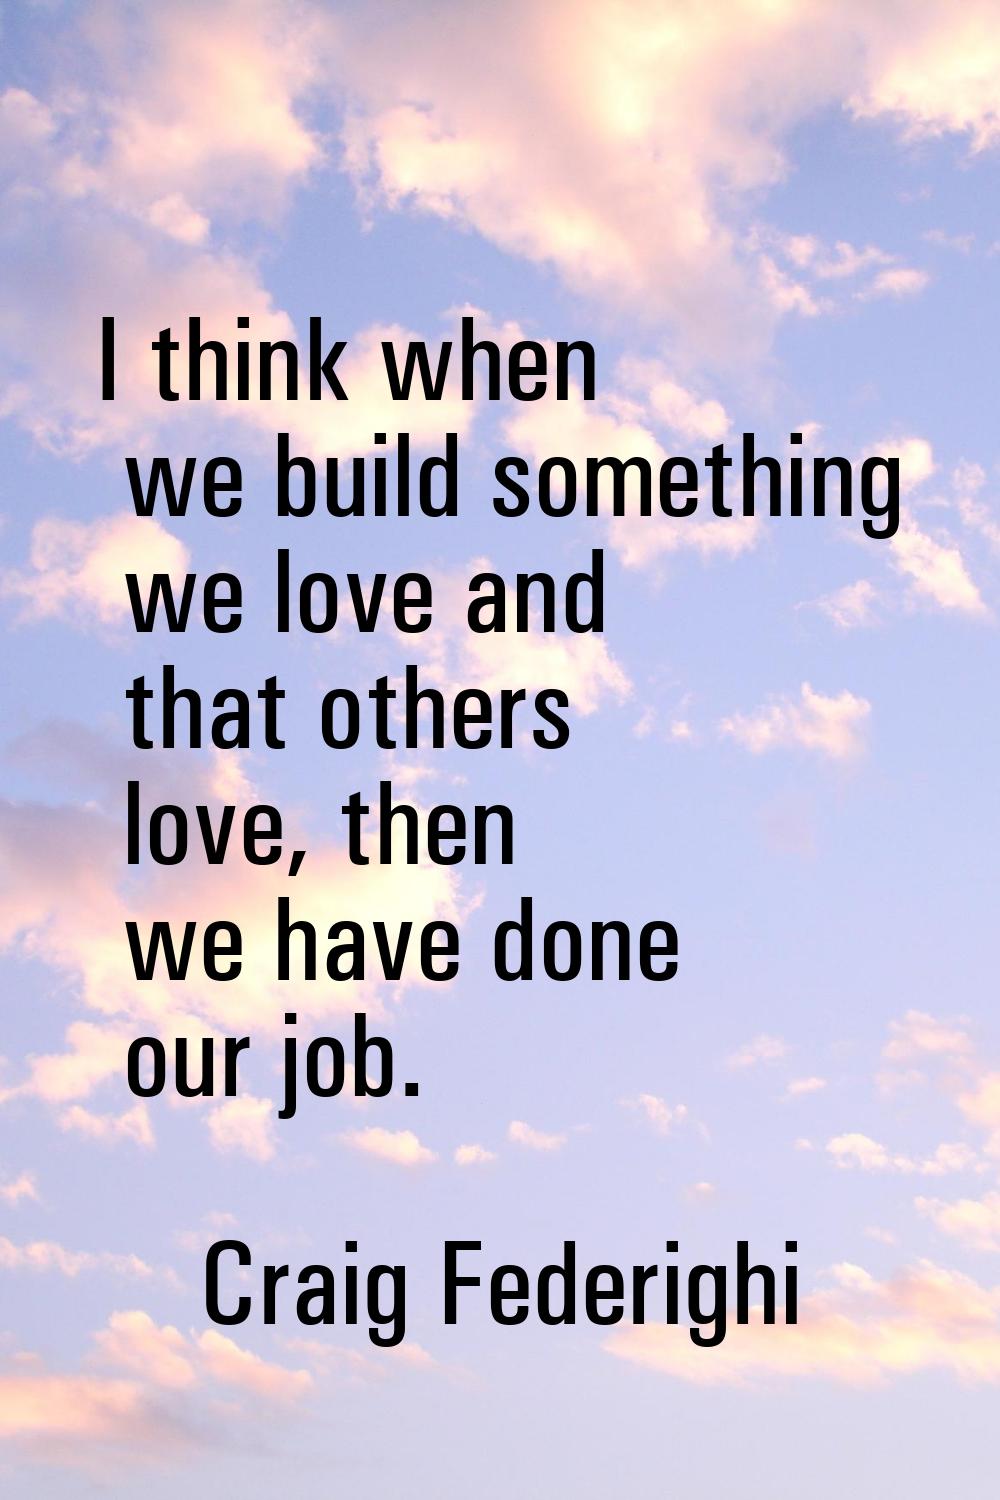 I think when we build something we love and that others love, then we have done our job.